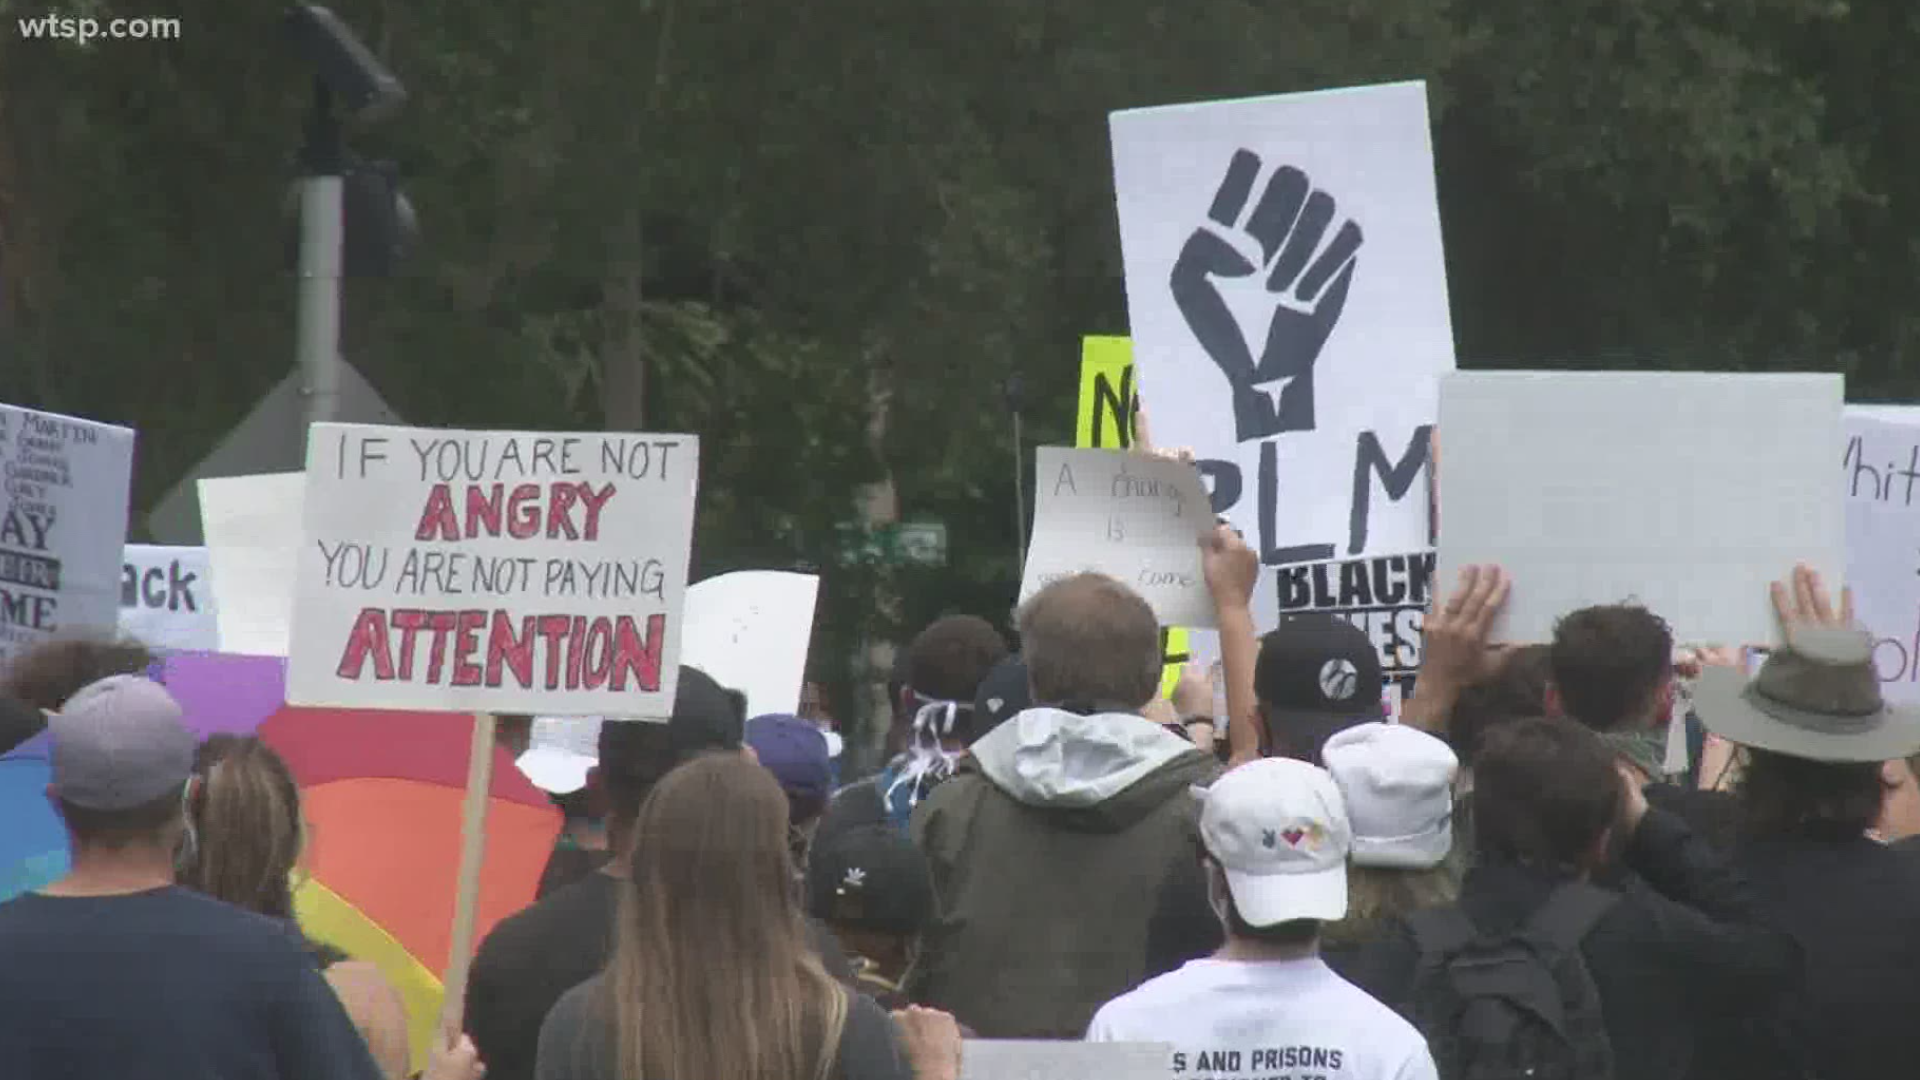 Dozens of protests took place around the area in St. Petersburg, Lakeland and Tampa.